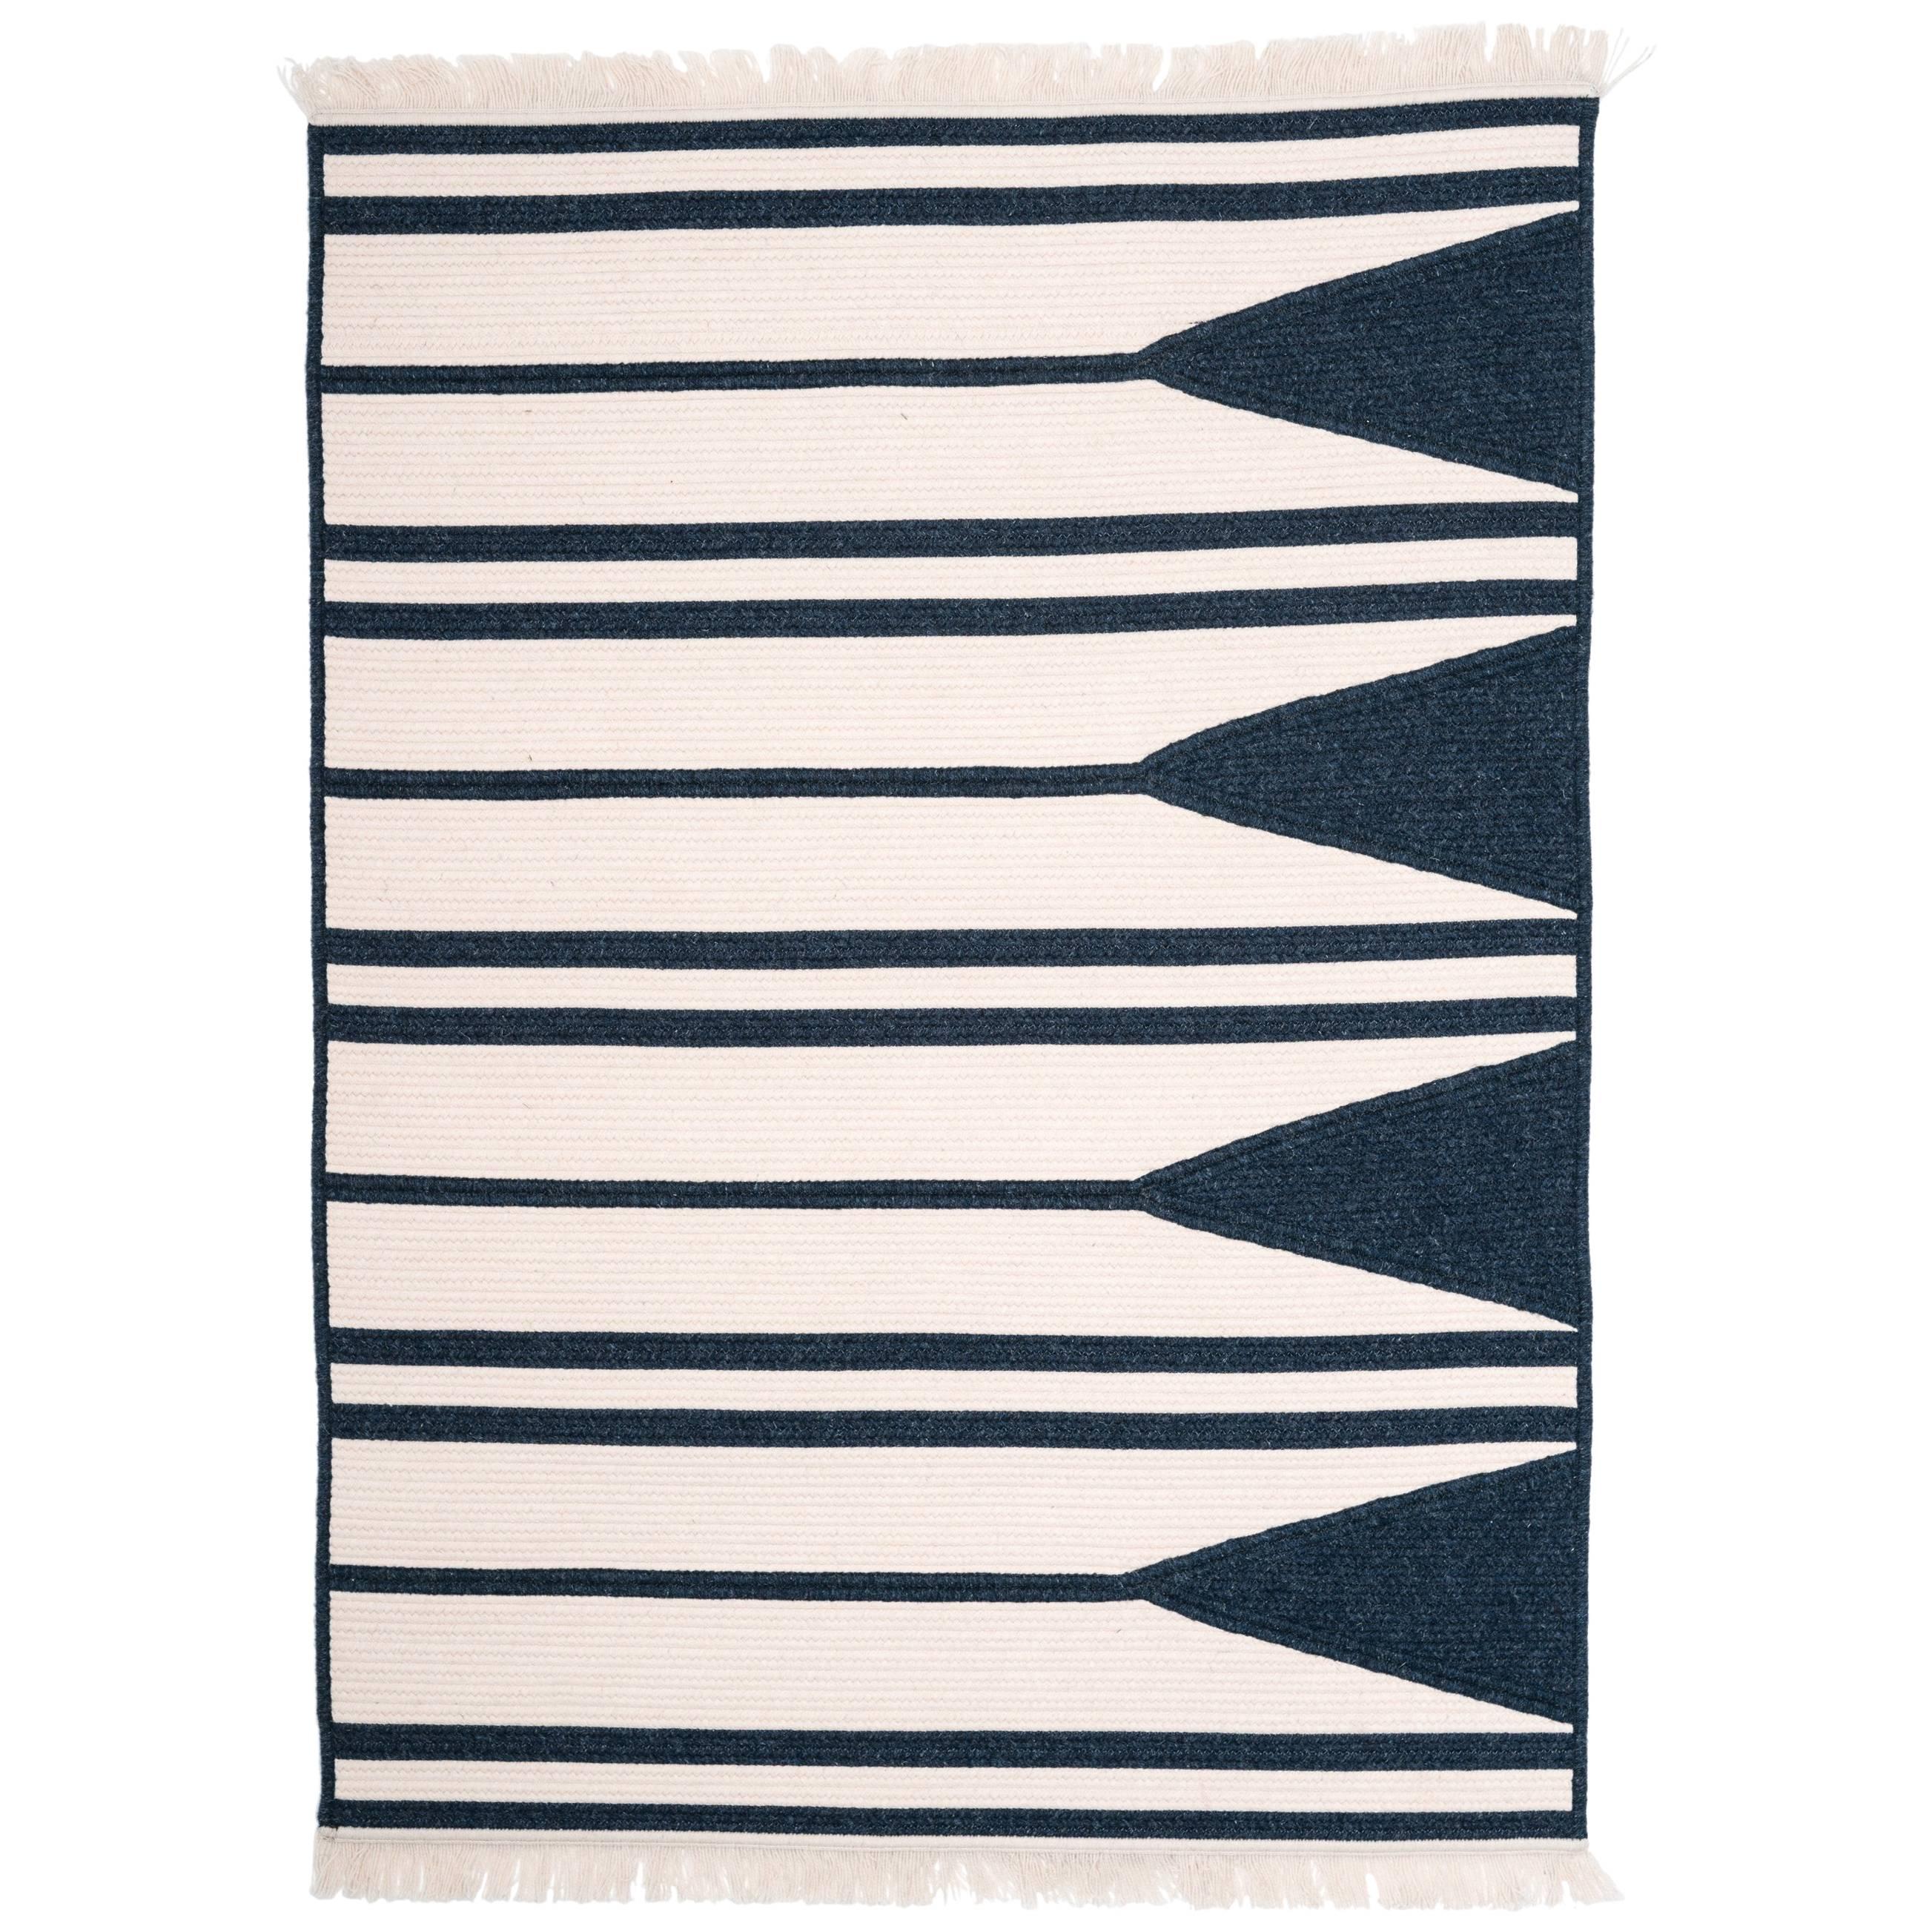 Aya Rug, Navy & White Woven Wool, Custom Made in the USA For Sale